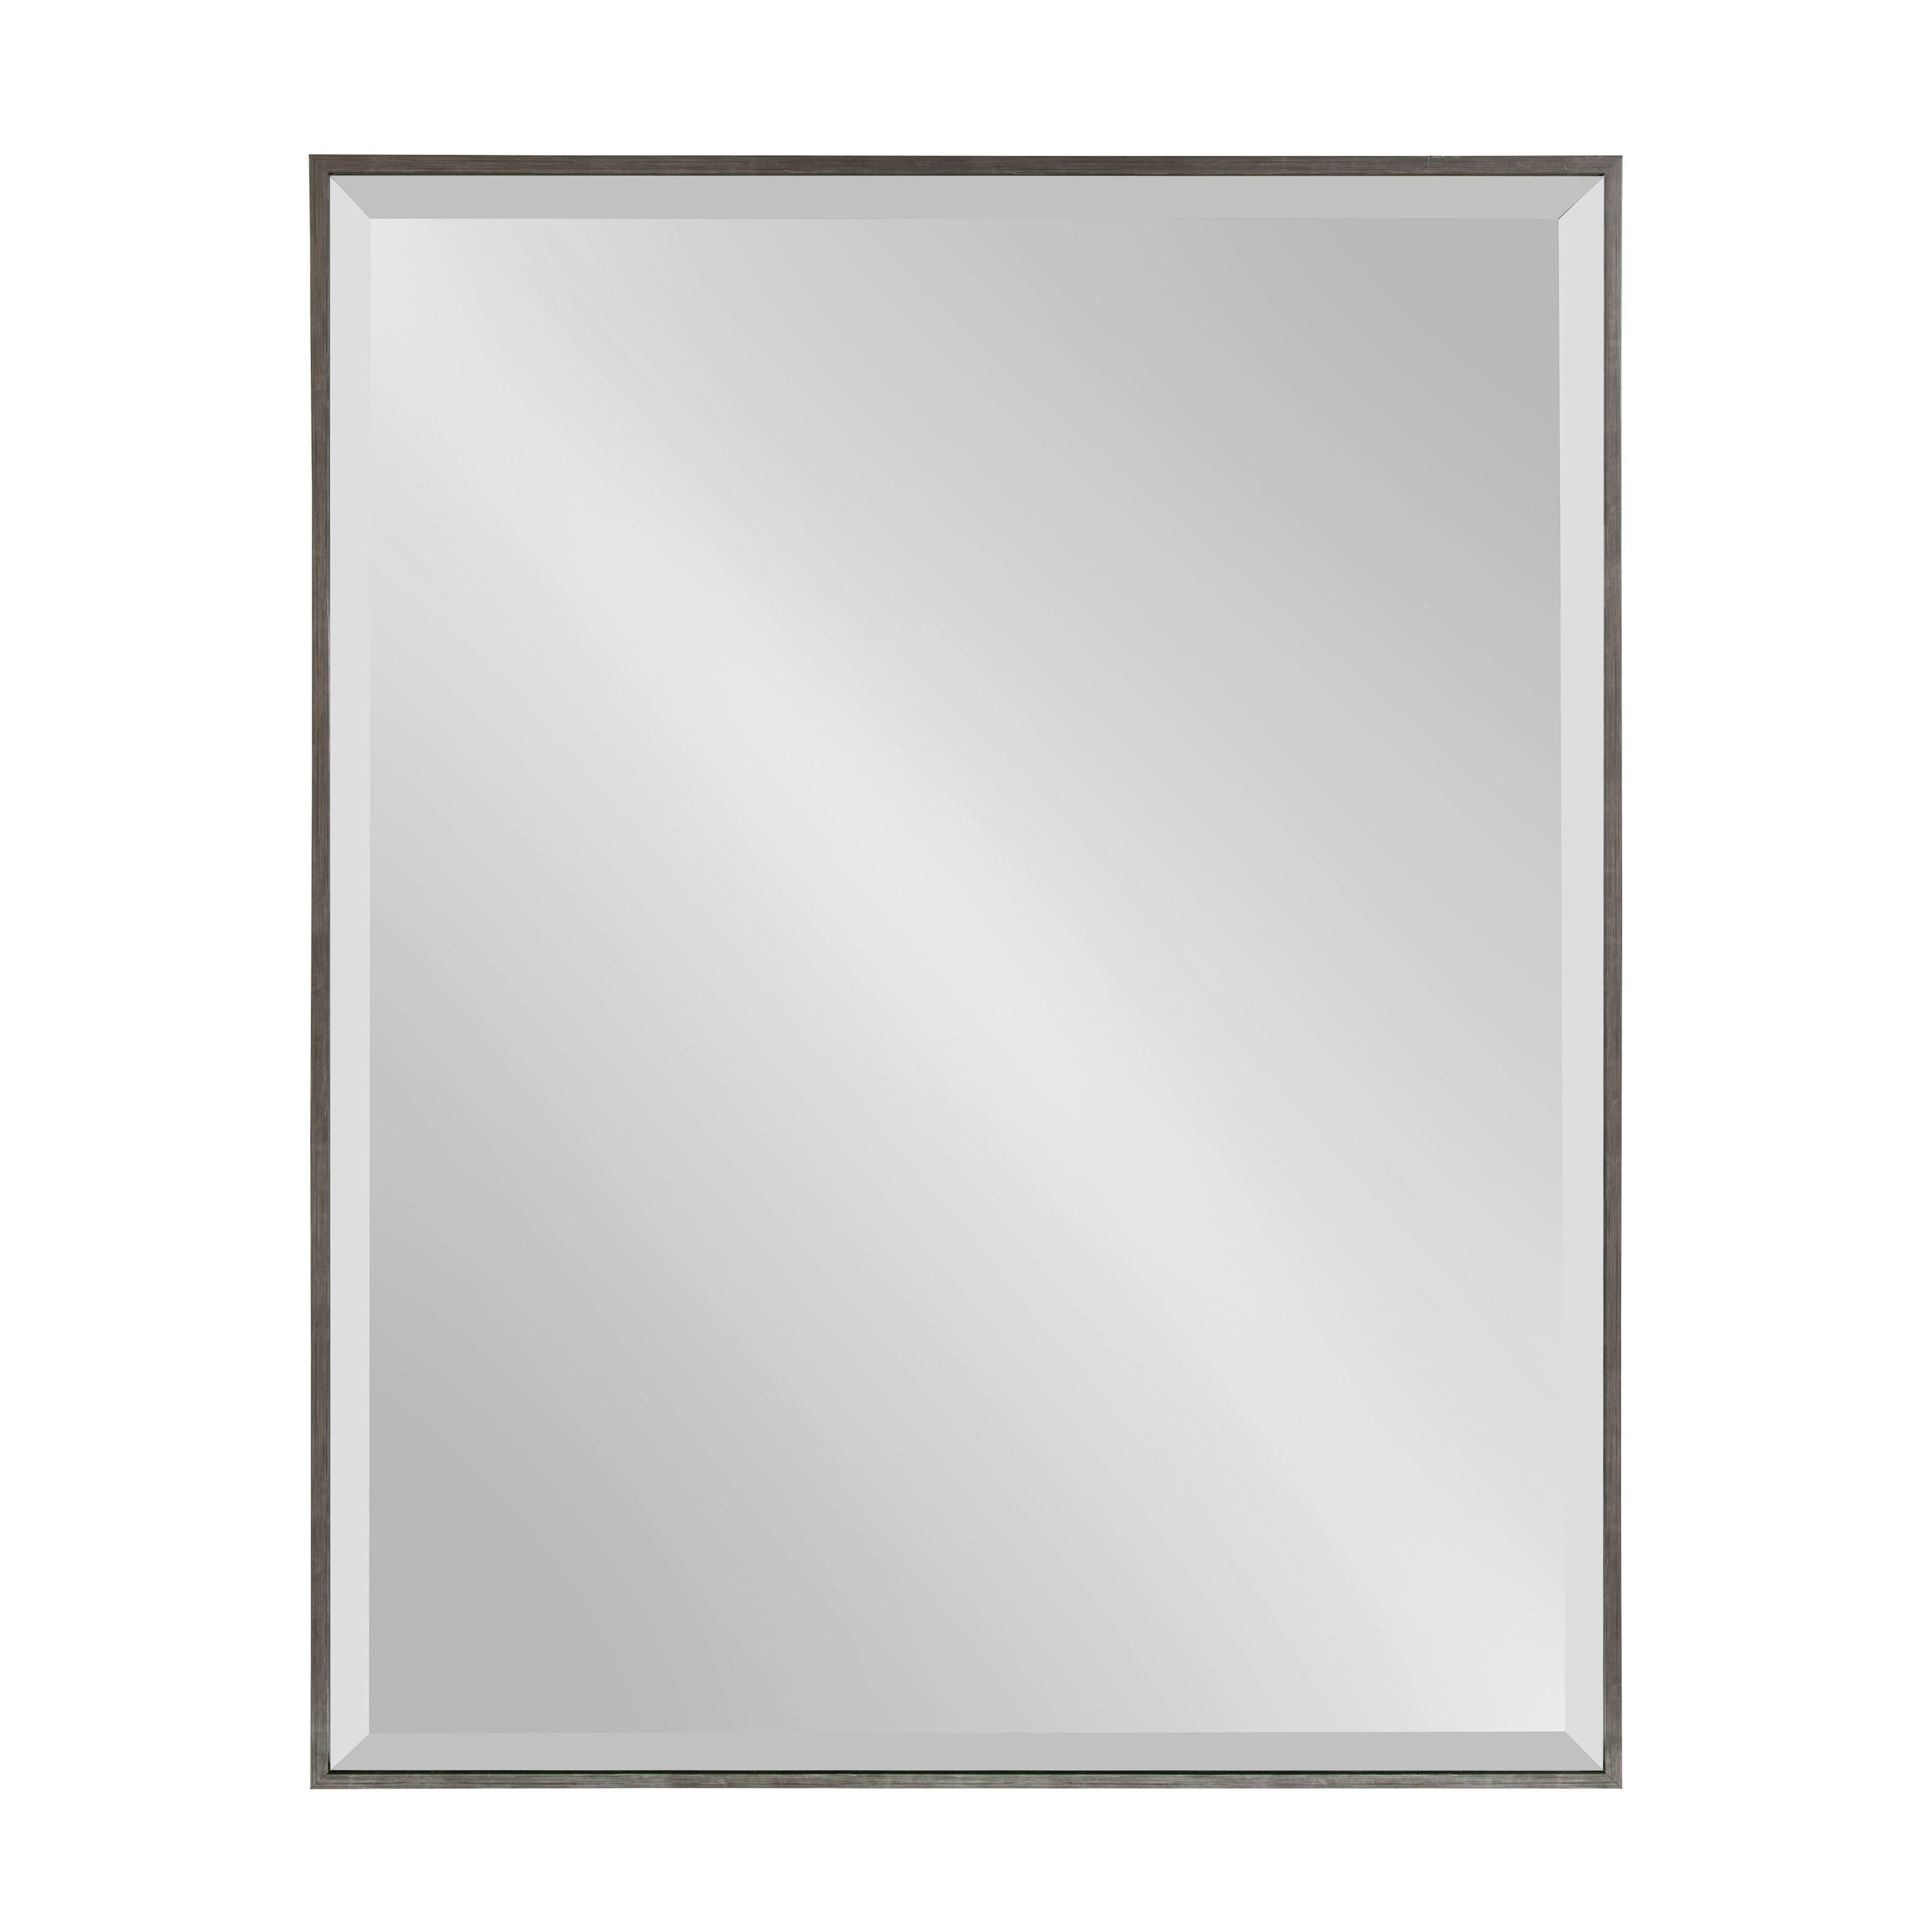 Kayden Accent Mirrors In Most Up To Date Logsdon Traditional Beveled Accent Mirror (View 9 of 20)